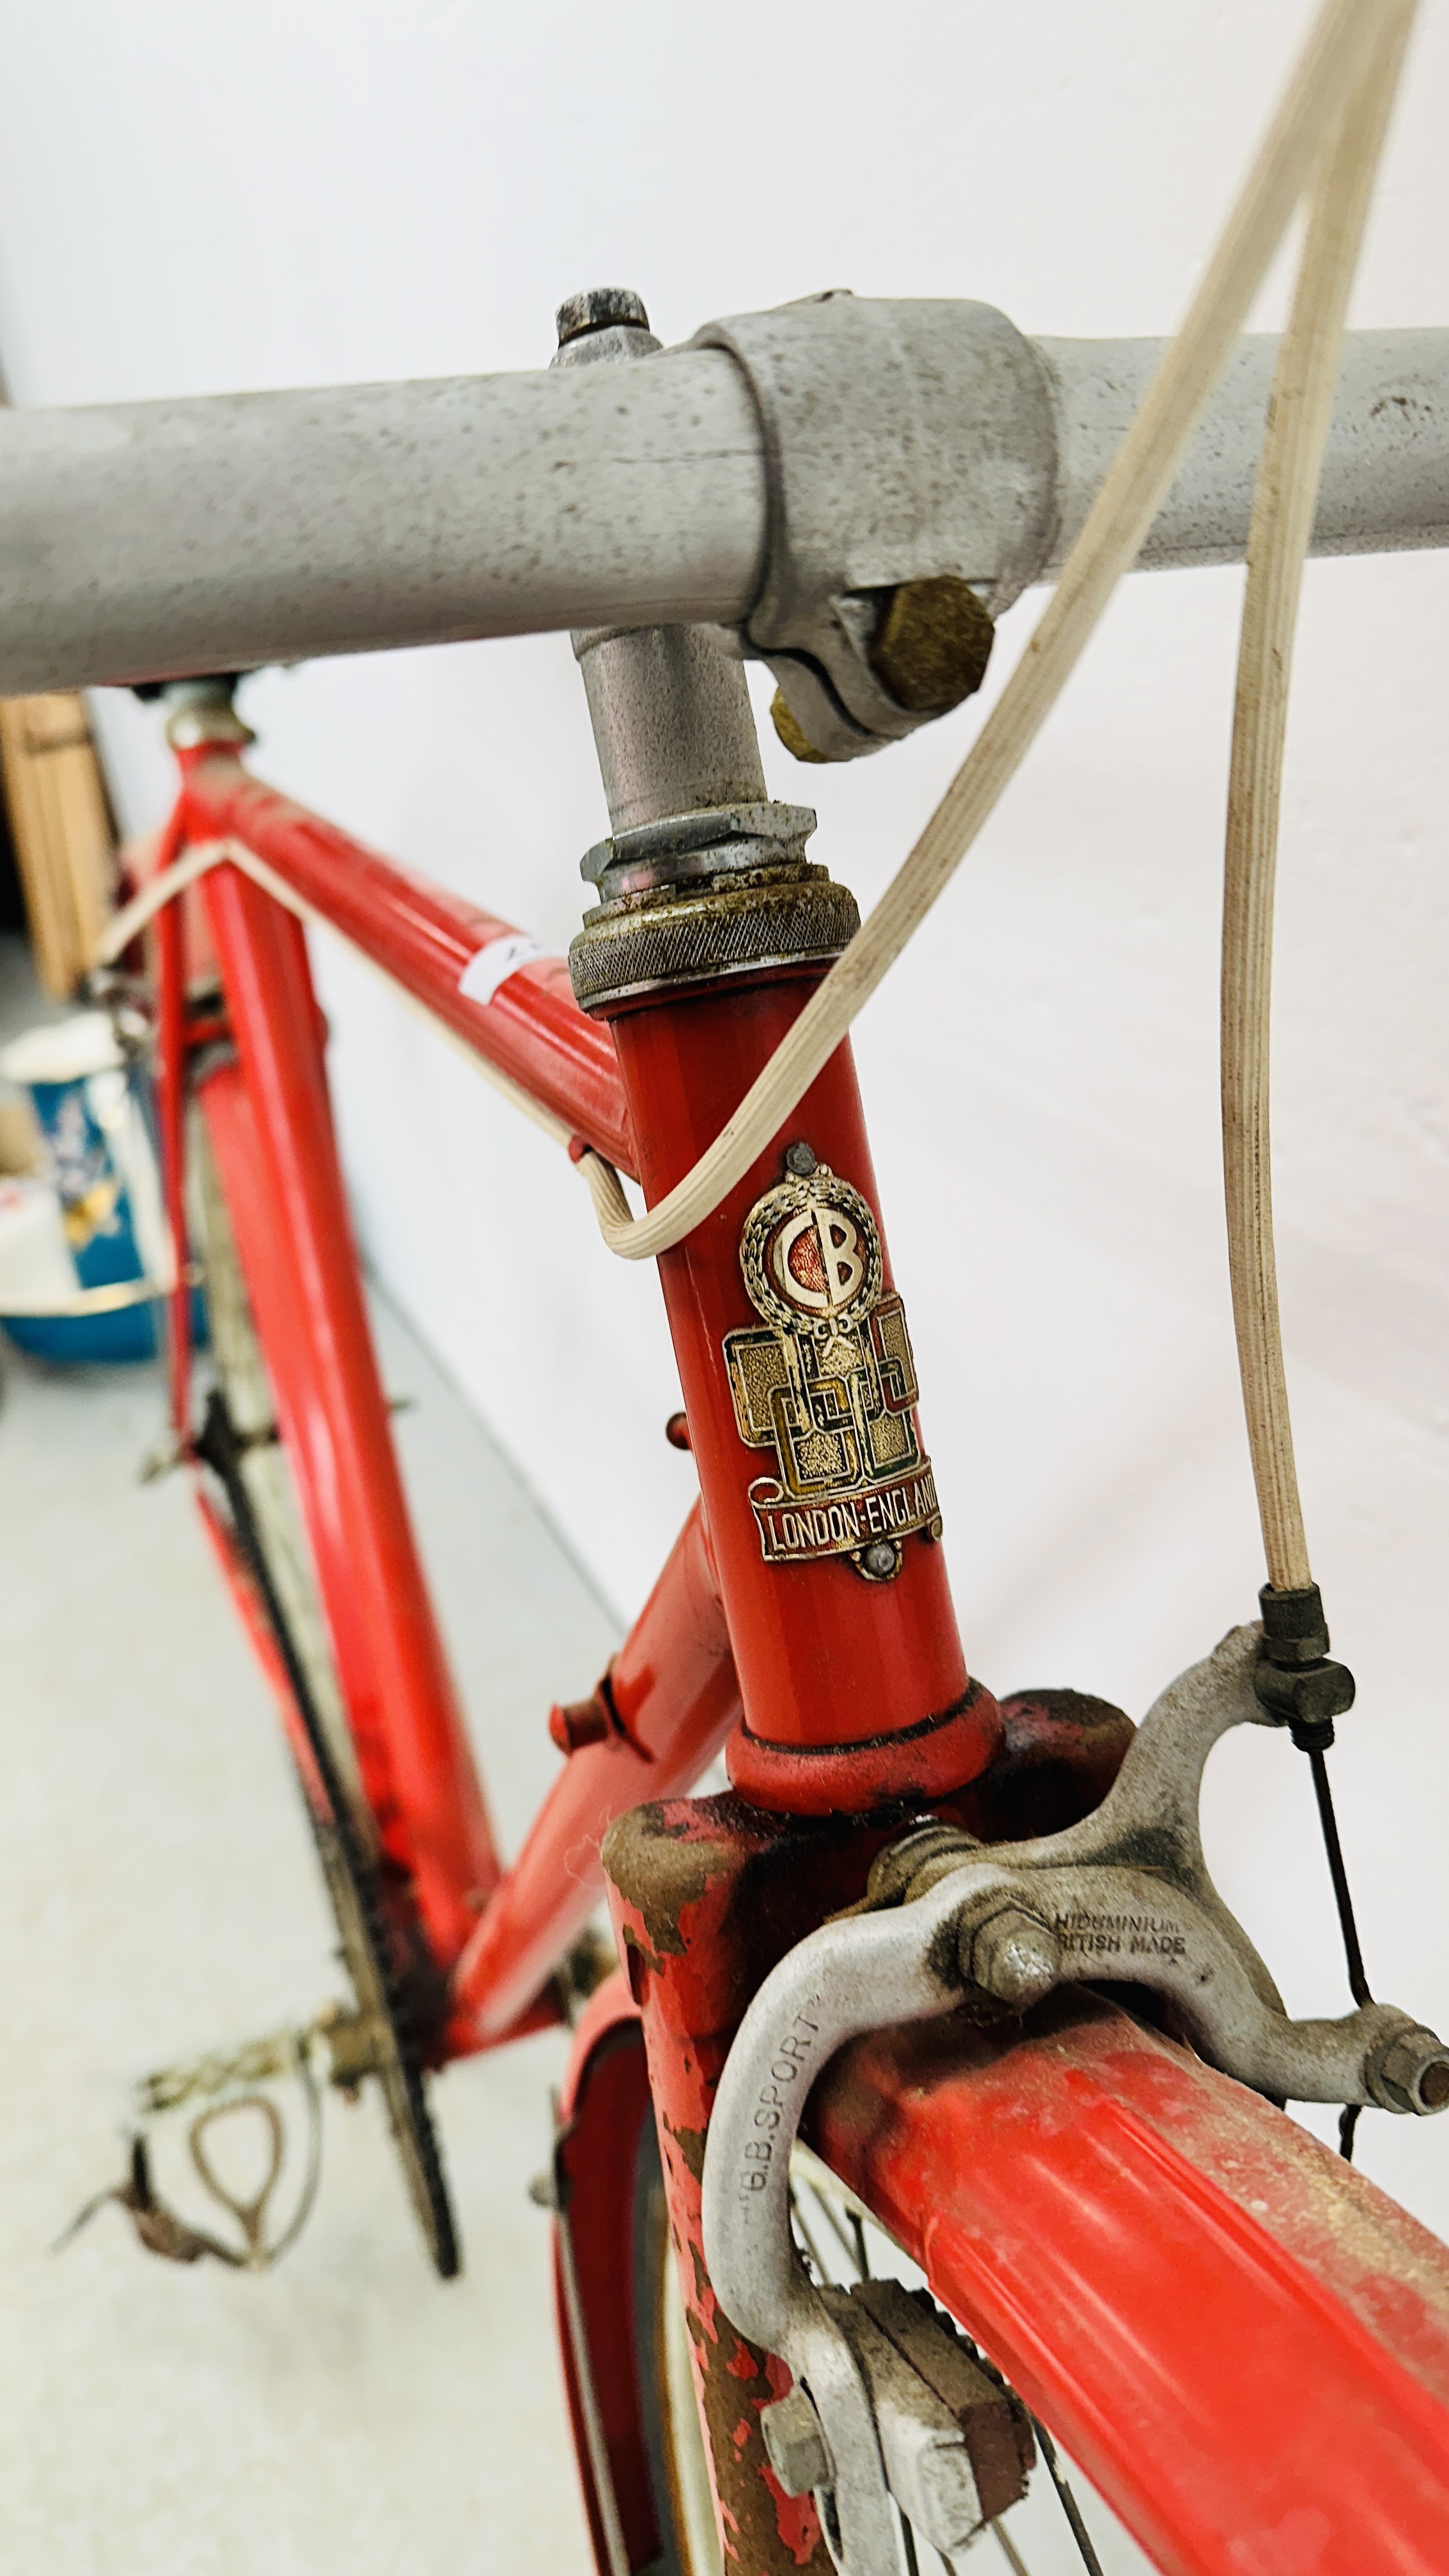 1948 OLYMPIC CLAUD BUTLER SINGLE SPEED RACING BIKE FITTED WITH A MIDDLE MORES LTD LEATHER SADDLE. - Image 5 of 14